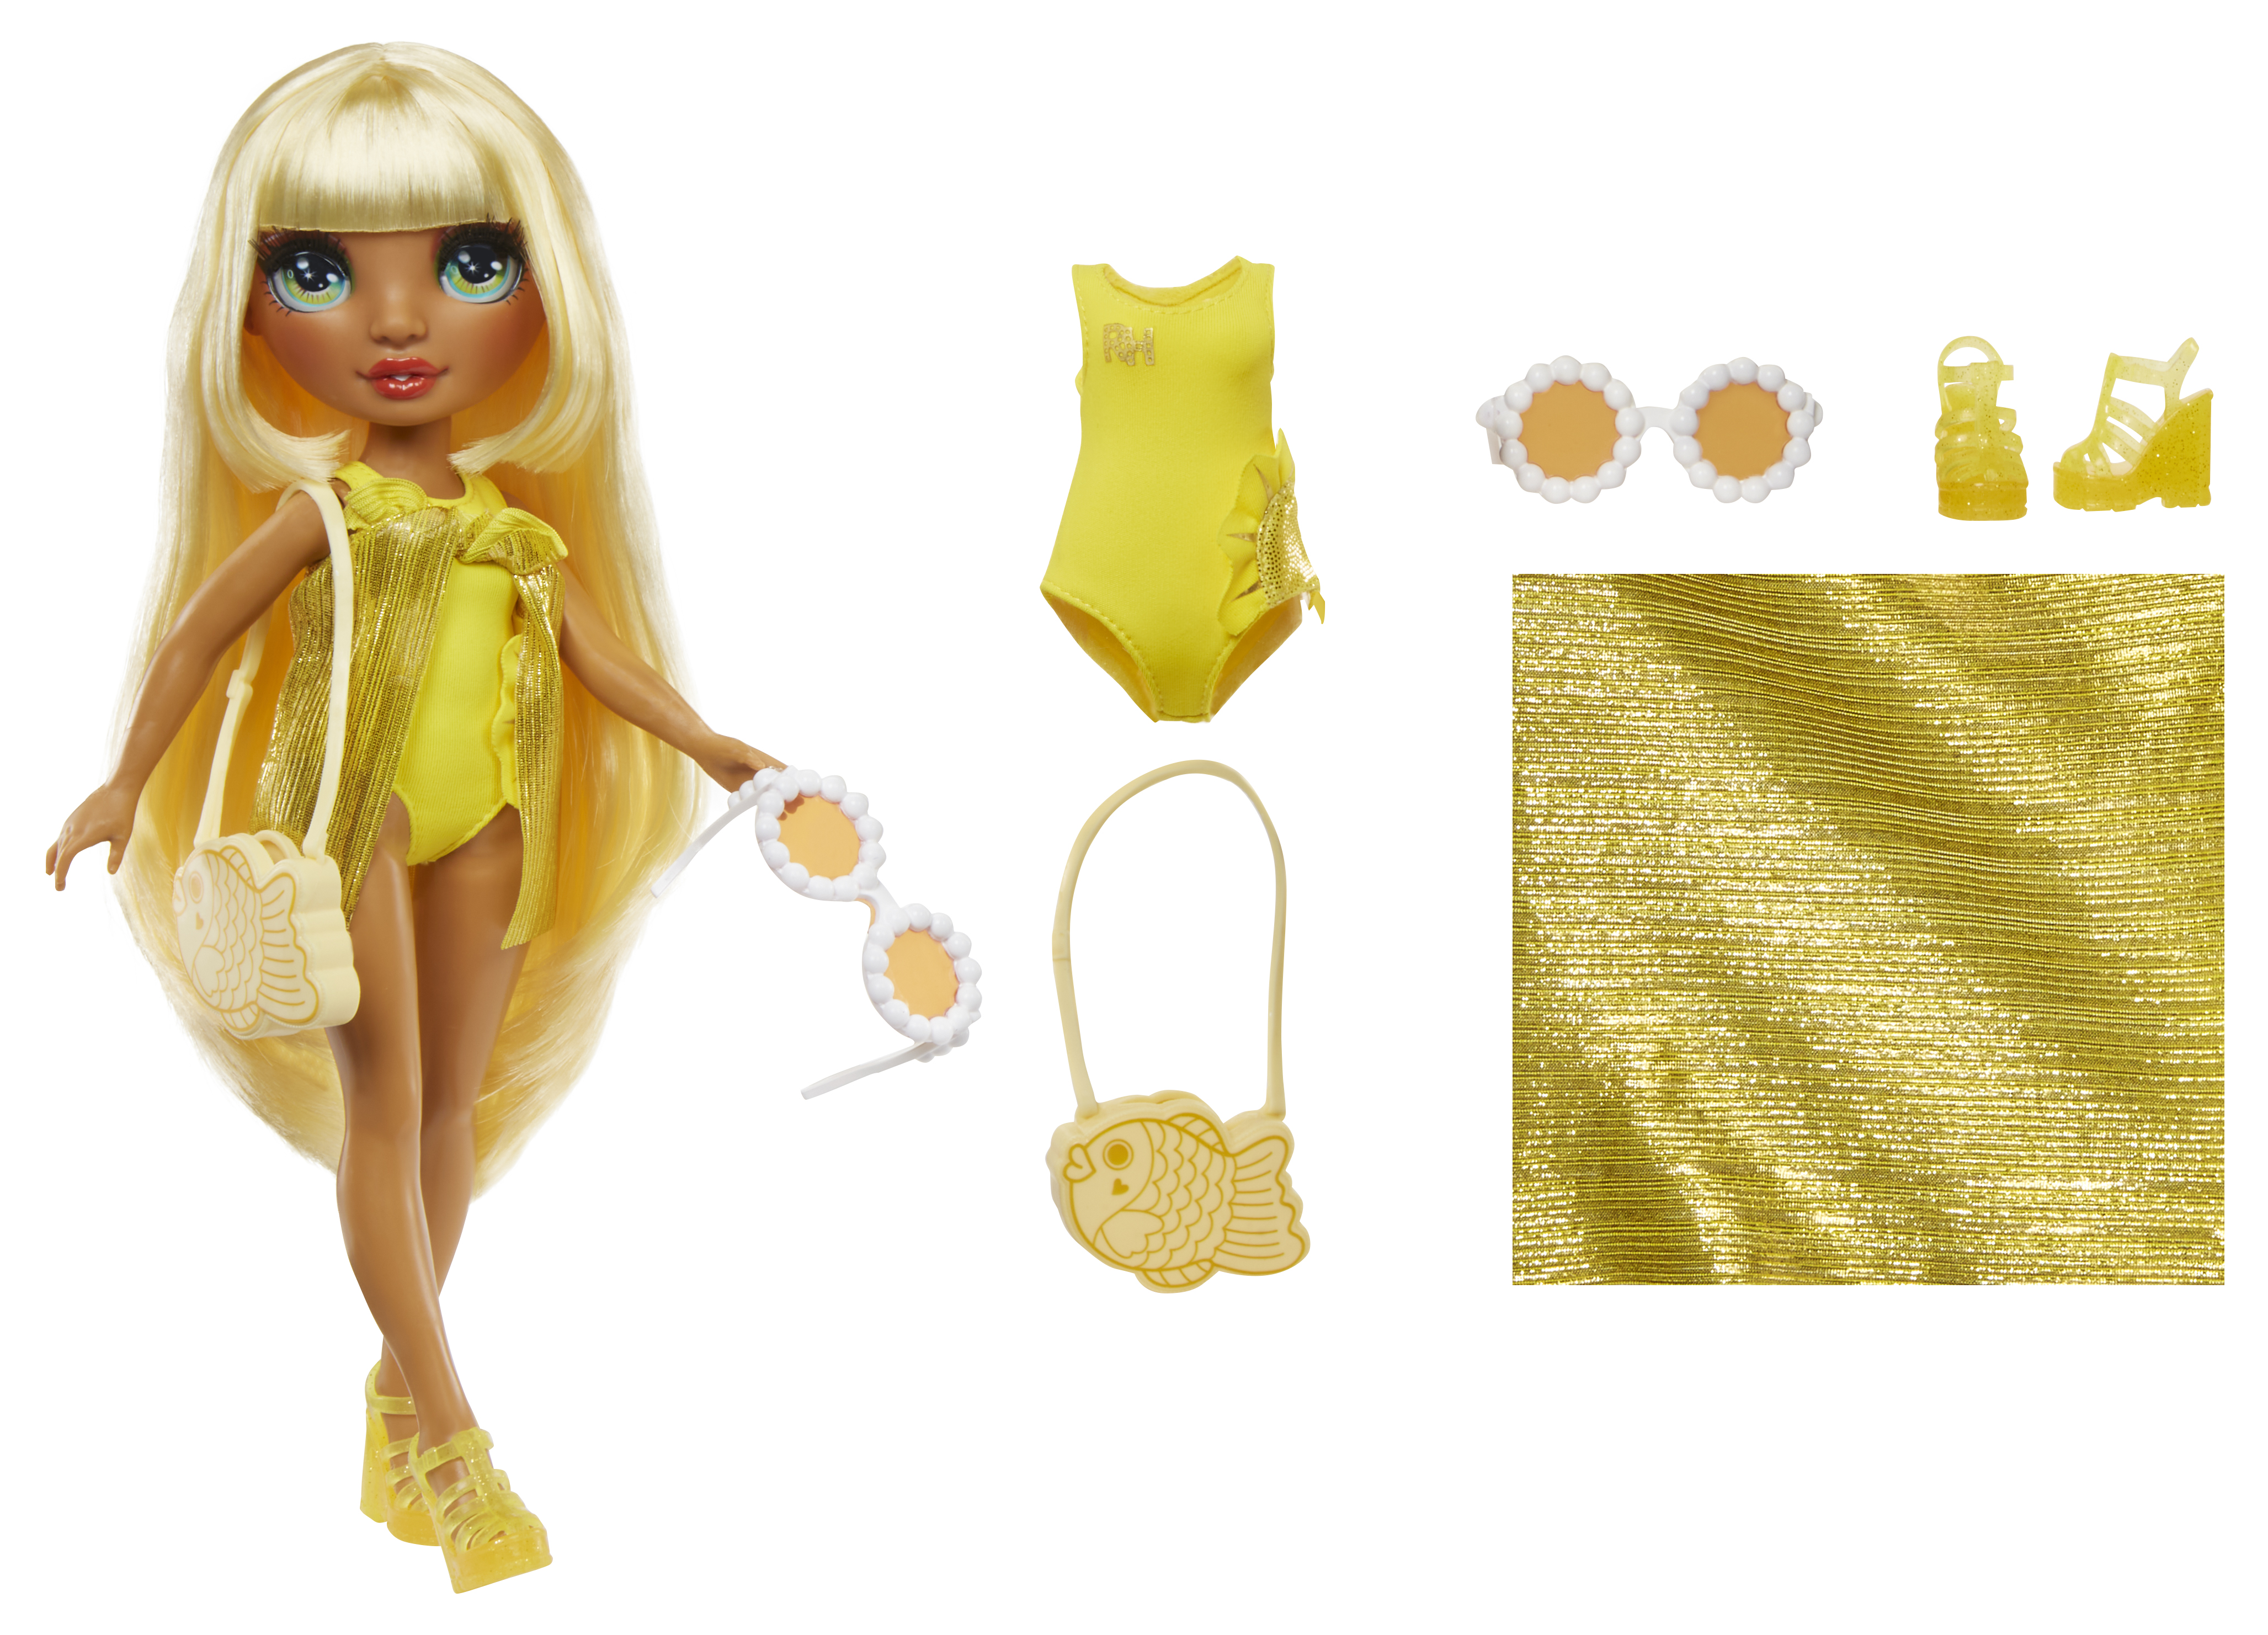 Rainbow High Swim & Style Sunny, Yellow 11? Doll, Removable Swimsuit, Wrap, Sandals, Fun Play Accessories. Kids Toy Gift Ages 4-12 - image 3 of 8